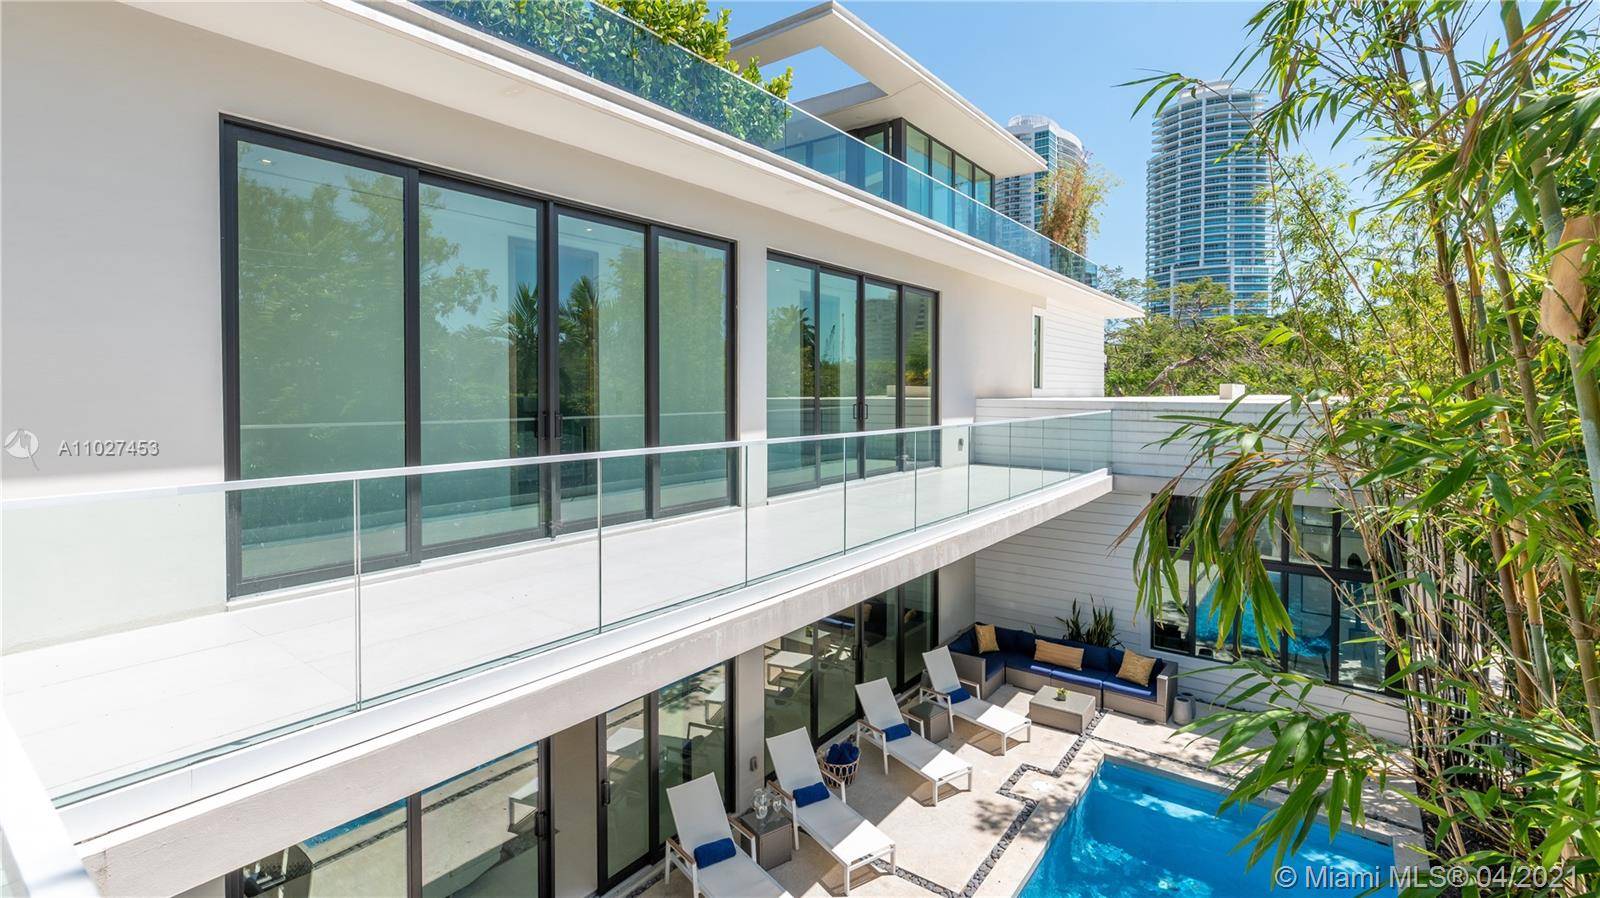 THIS IS A STUNNING BRICKELL HOME, ULTRA MODERN WITH ONLY THE FINEST OF FINISHES.